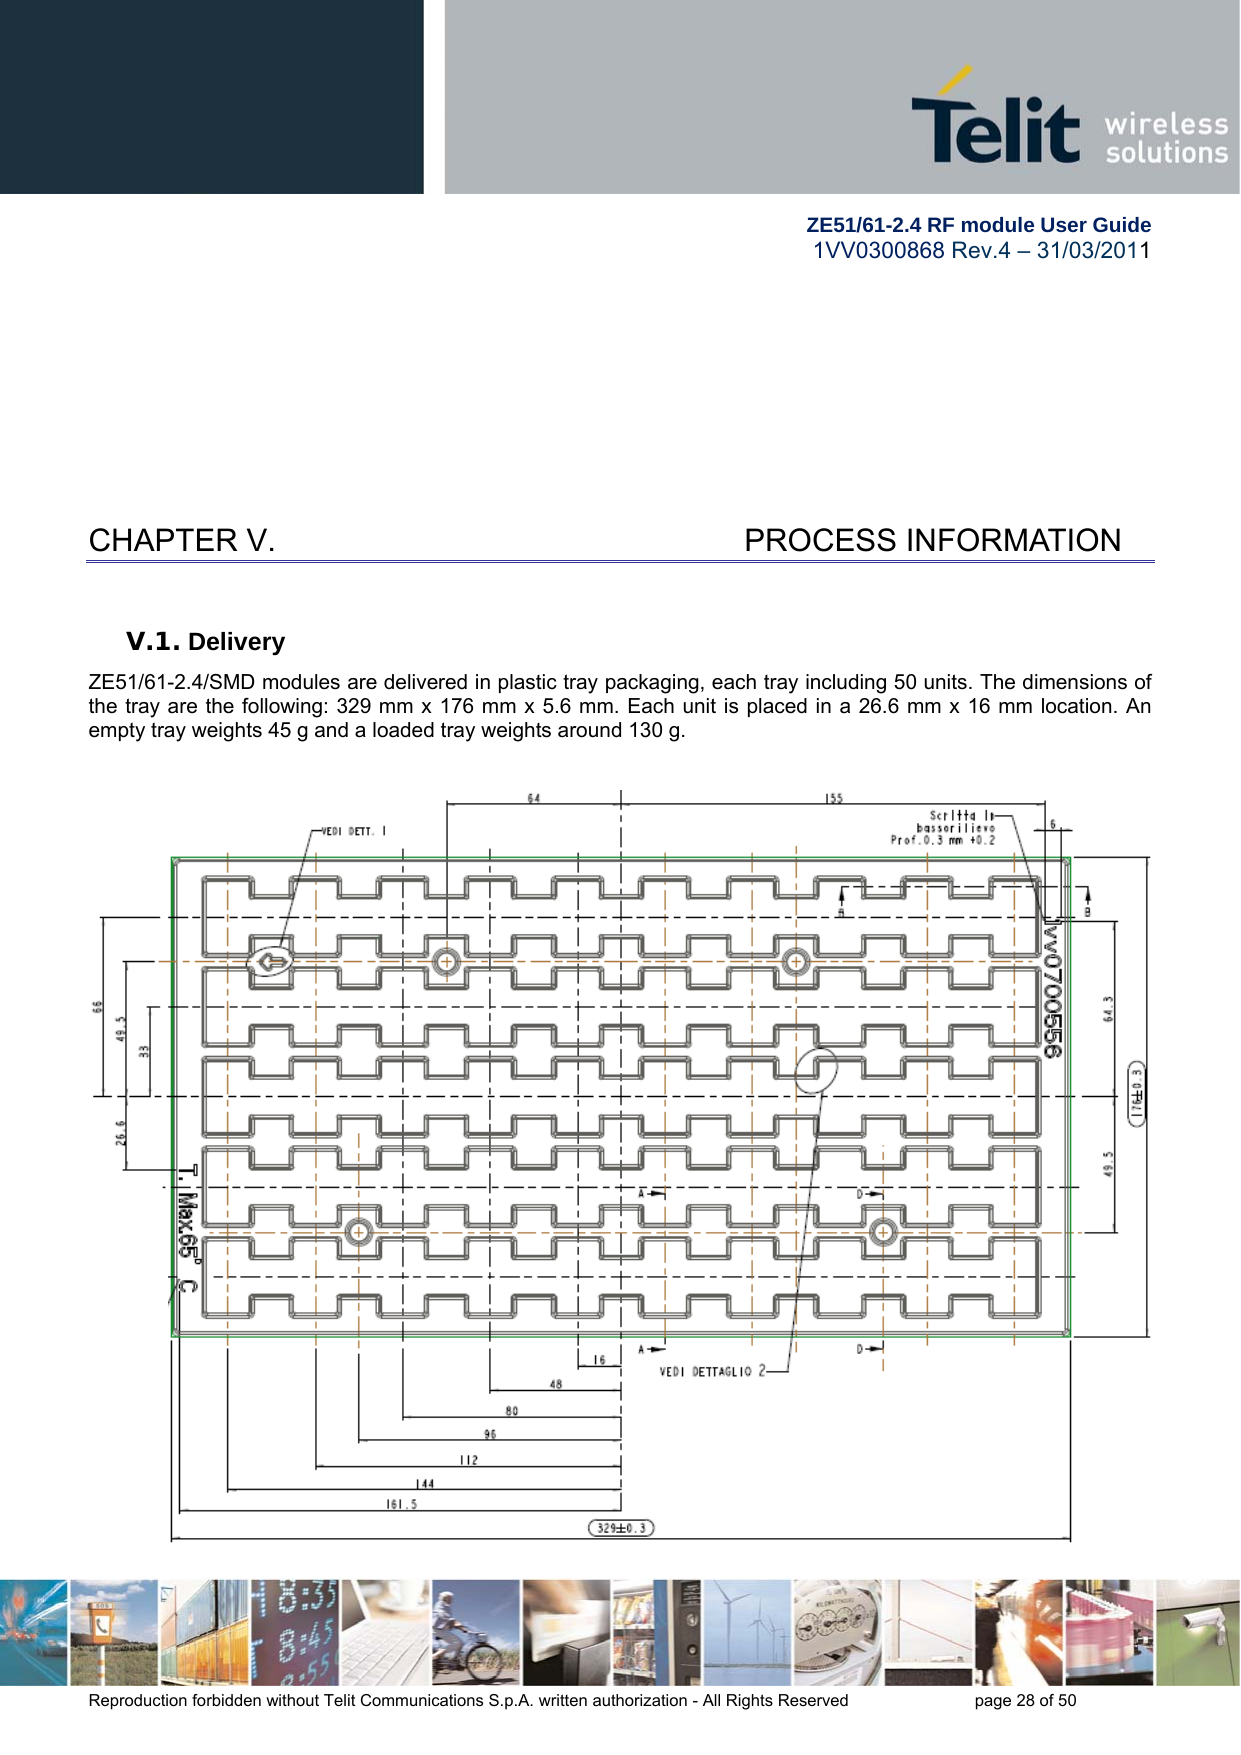         ZE51/61-2.4 RF module User Guide 1VV0300868 Rev.4 – 31/03/2011 Reproduction forbidden without Telit Communications S.p.A. written authorization - All Rights Reserved    page 28 of 50   CHAPTER V.    PROCESS INFORMATION V.1. Delivery ZE51/61-2.4/SMD modules are delivered in plastic tray packaging, each tray including 50 units. The dimensions of the tray are the following: 329 mm x 176 mm x 5.6 mm. Each unit is placed in a 26.6 mm x 16 mm location. An empty tray weights 45 g and a loaded tray weights around 130 g.     